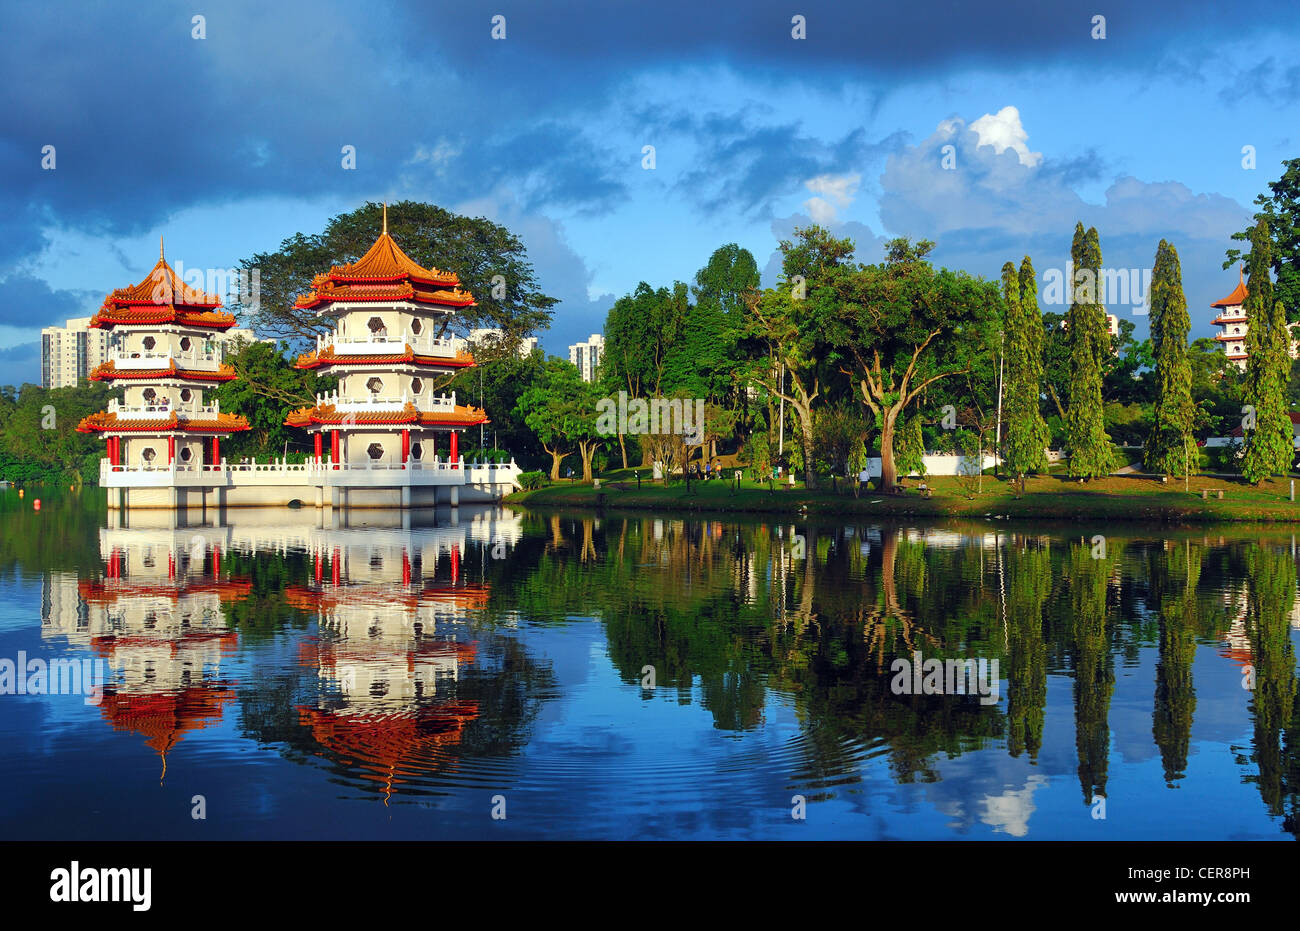 The Twin Pagodas At The Chinese Garden In Singapore Stock Photo Alamy